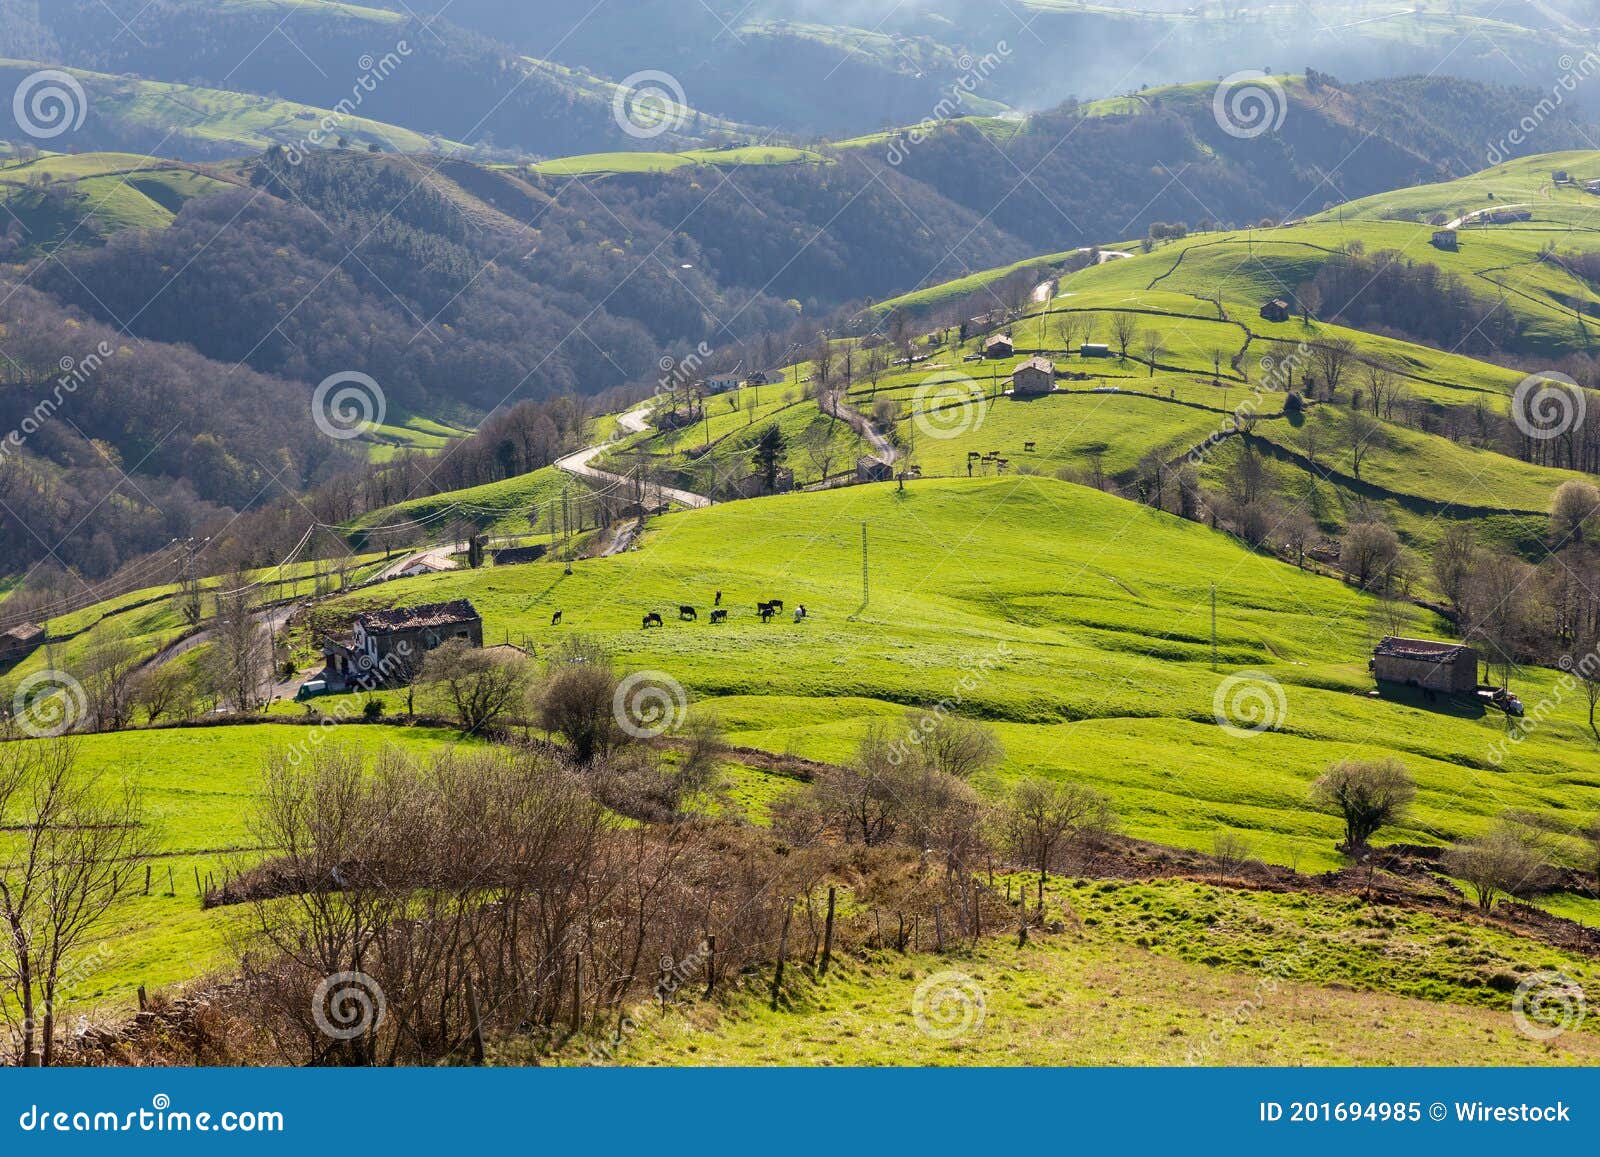 pasiegos valleys in the hinterland of cantabria, spain